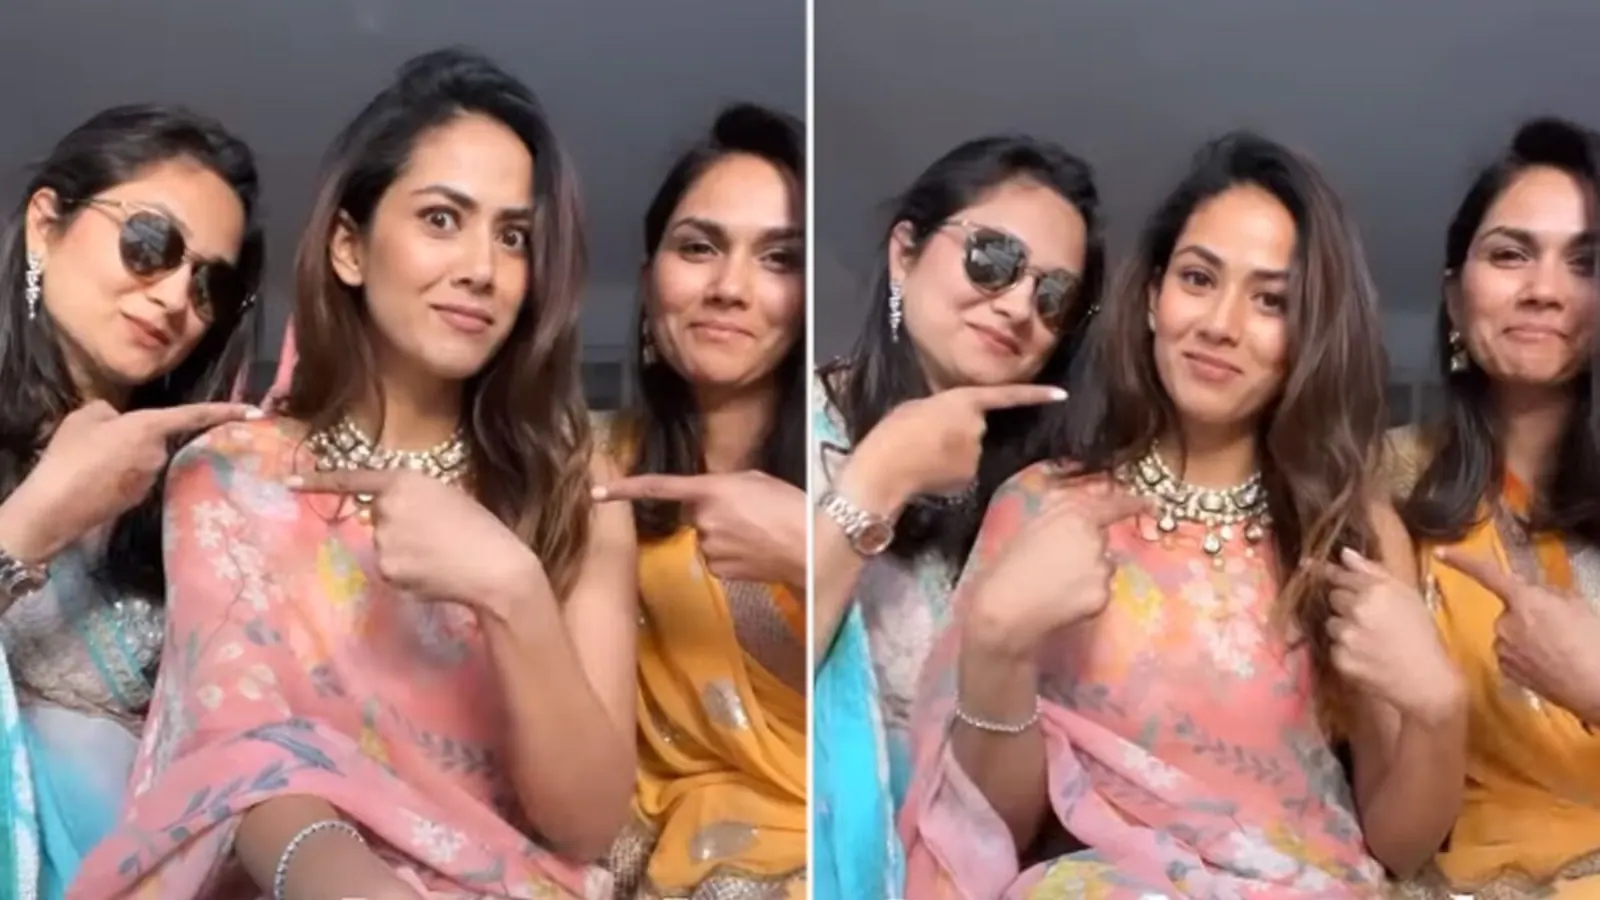 Mira Rajput’s sisters make revelations about her: She spends the most, is the one likely to get arrested. Watch